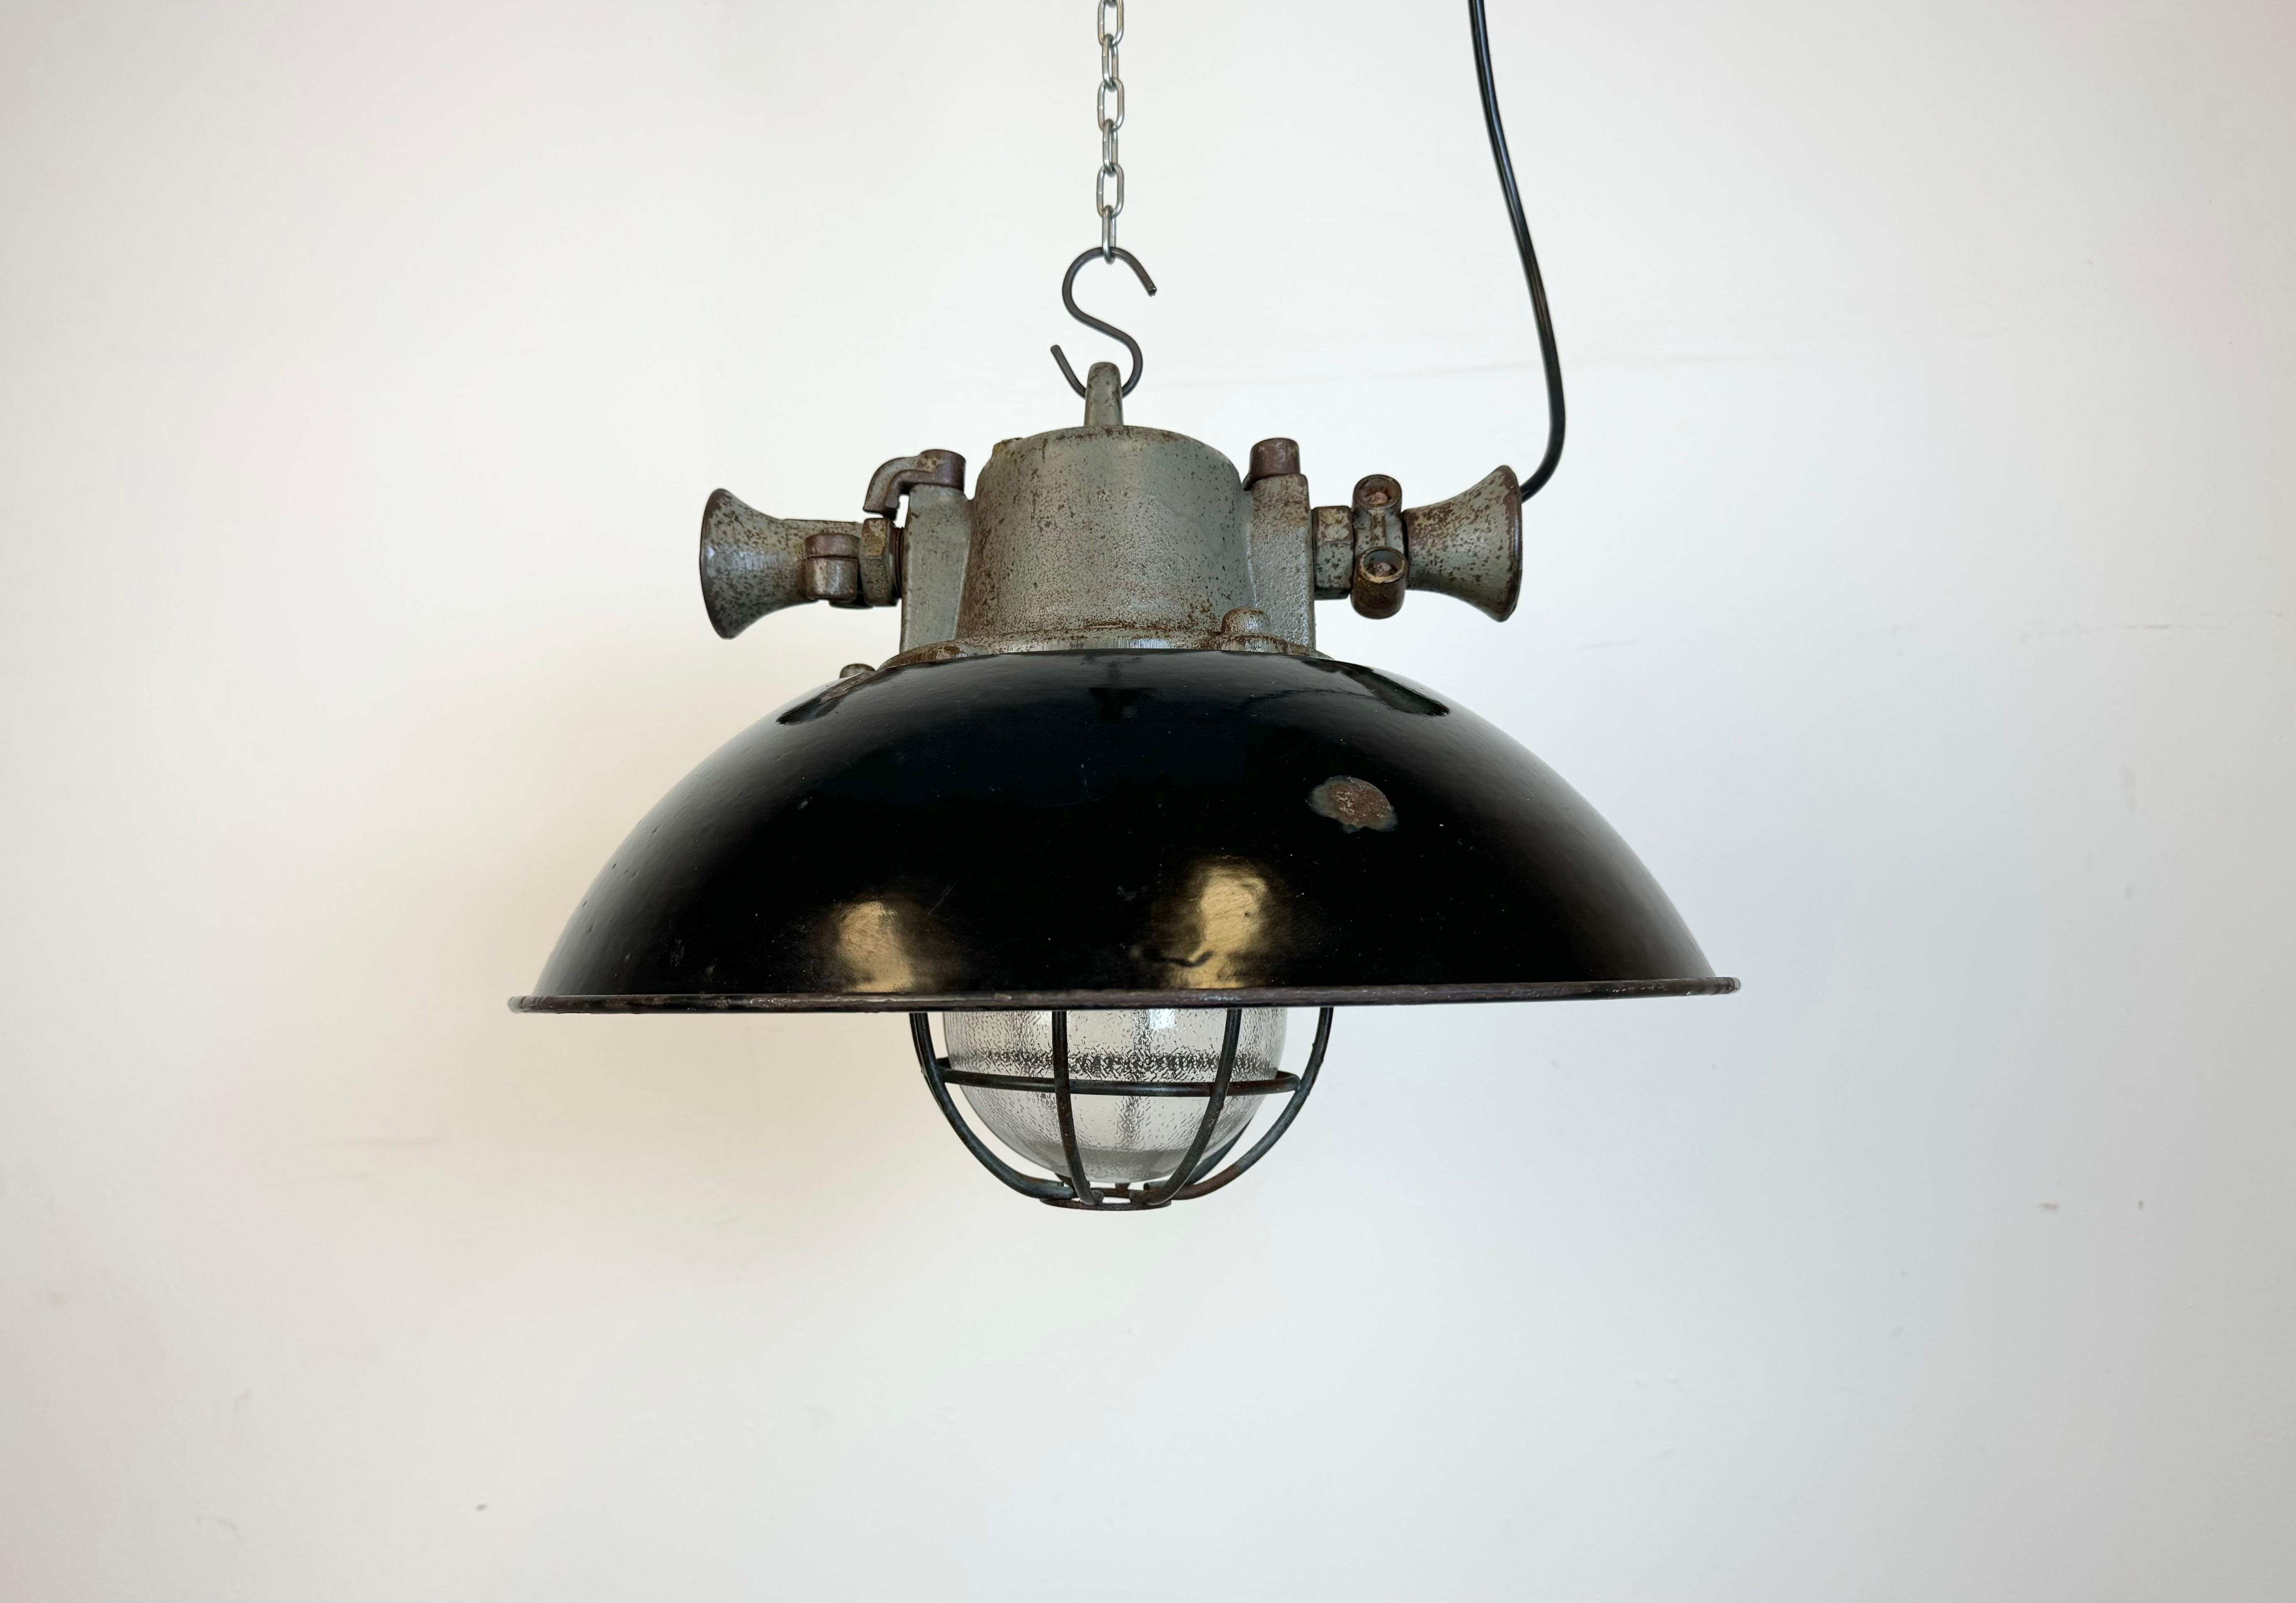 Industrial hanging lamp manufactured during the 1950s in former Czechoslovakia. It features a black enamel shade with white enamel interior, a cast iron top,a clear glass cover and an iron grid. Porcelain socket requires standard E27/E26 lightbulbs.